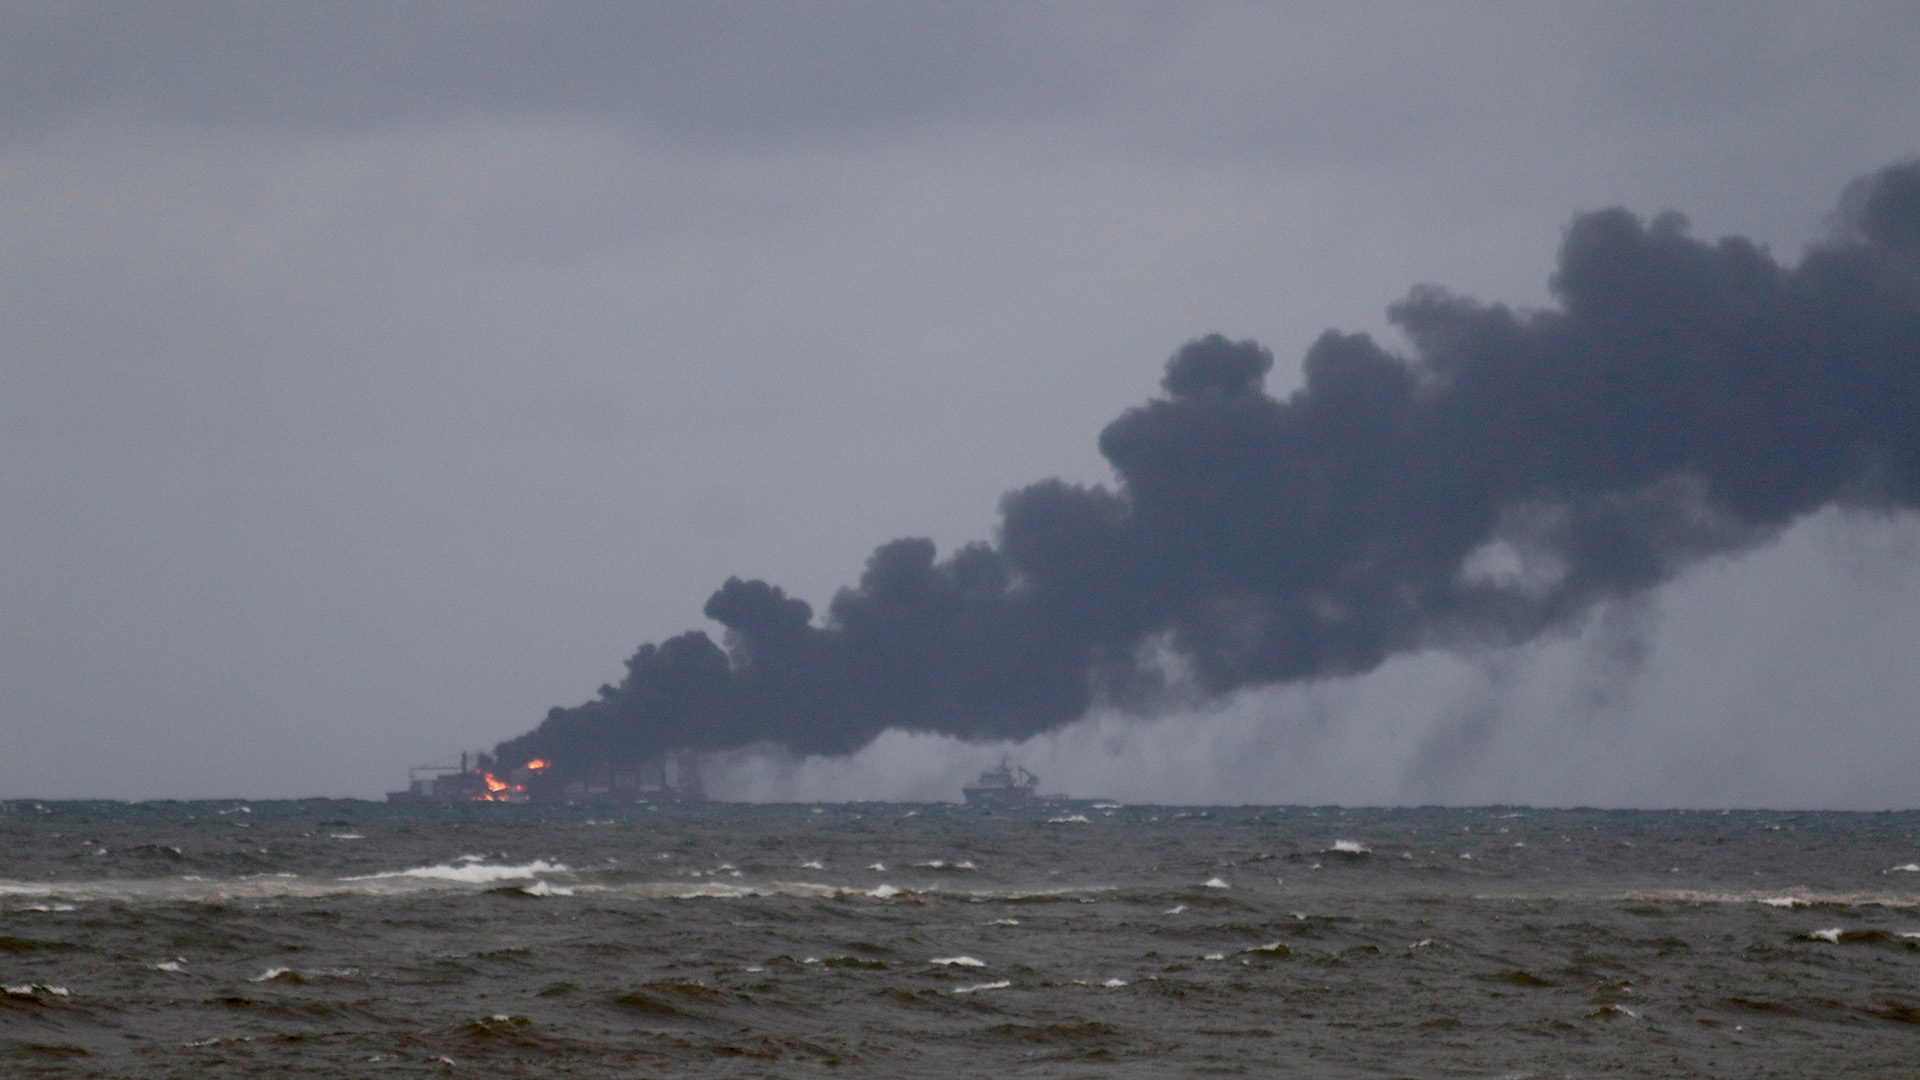 The chemical fires from the M/V X-Press Pearl cargo ship were visible from the shores of Sri Lanka. (© Woods Hole Oceanographic Institution)